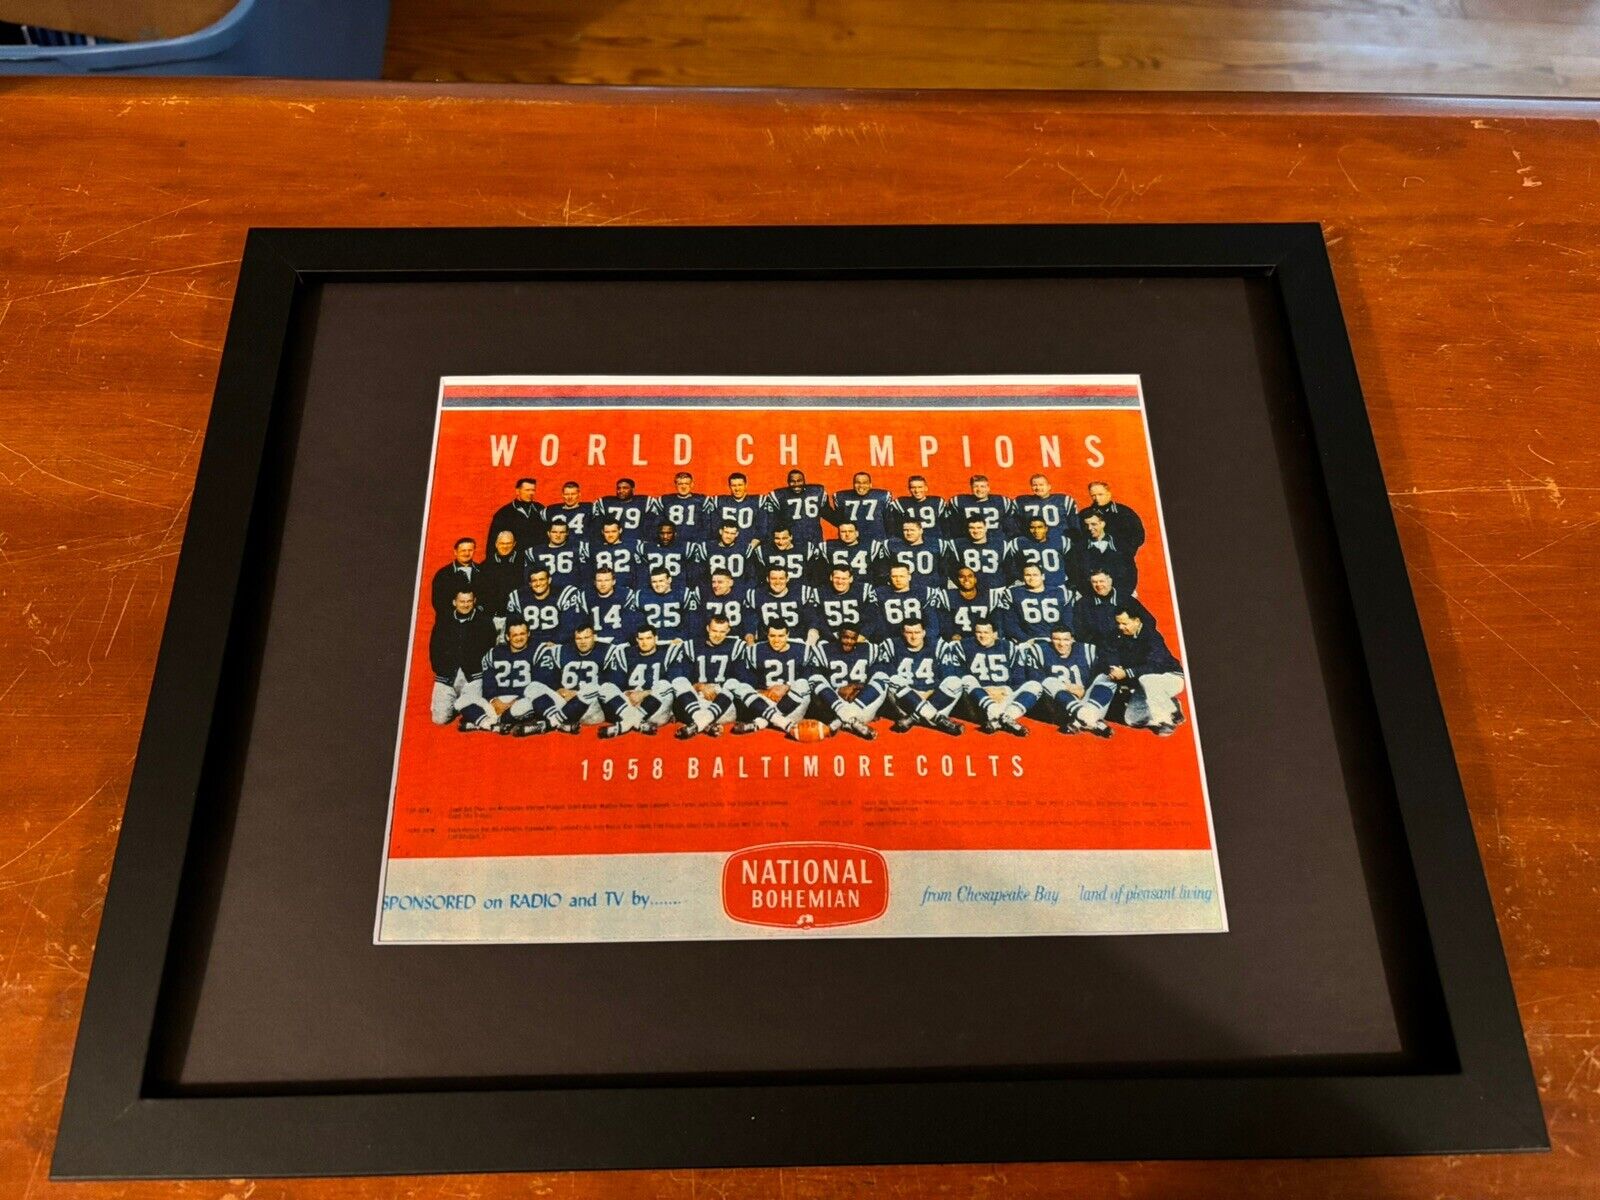 Beautifully Framed And Matted 1958 Baltimore Colts Team 8 X 10 Photo.